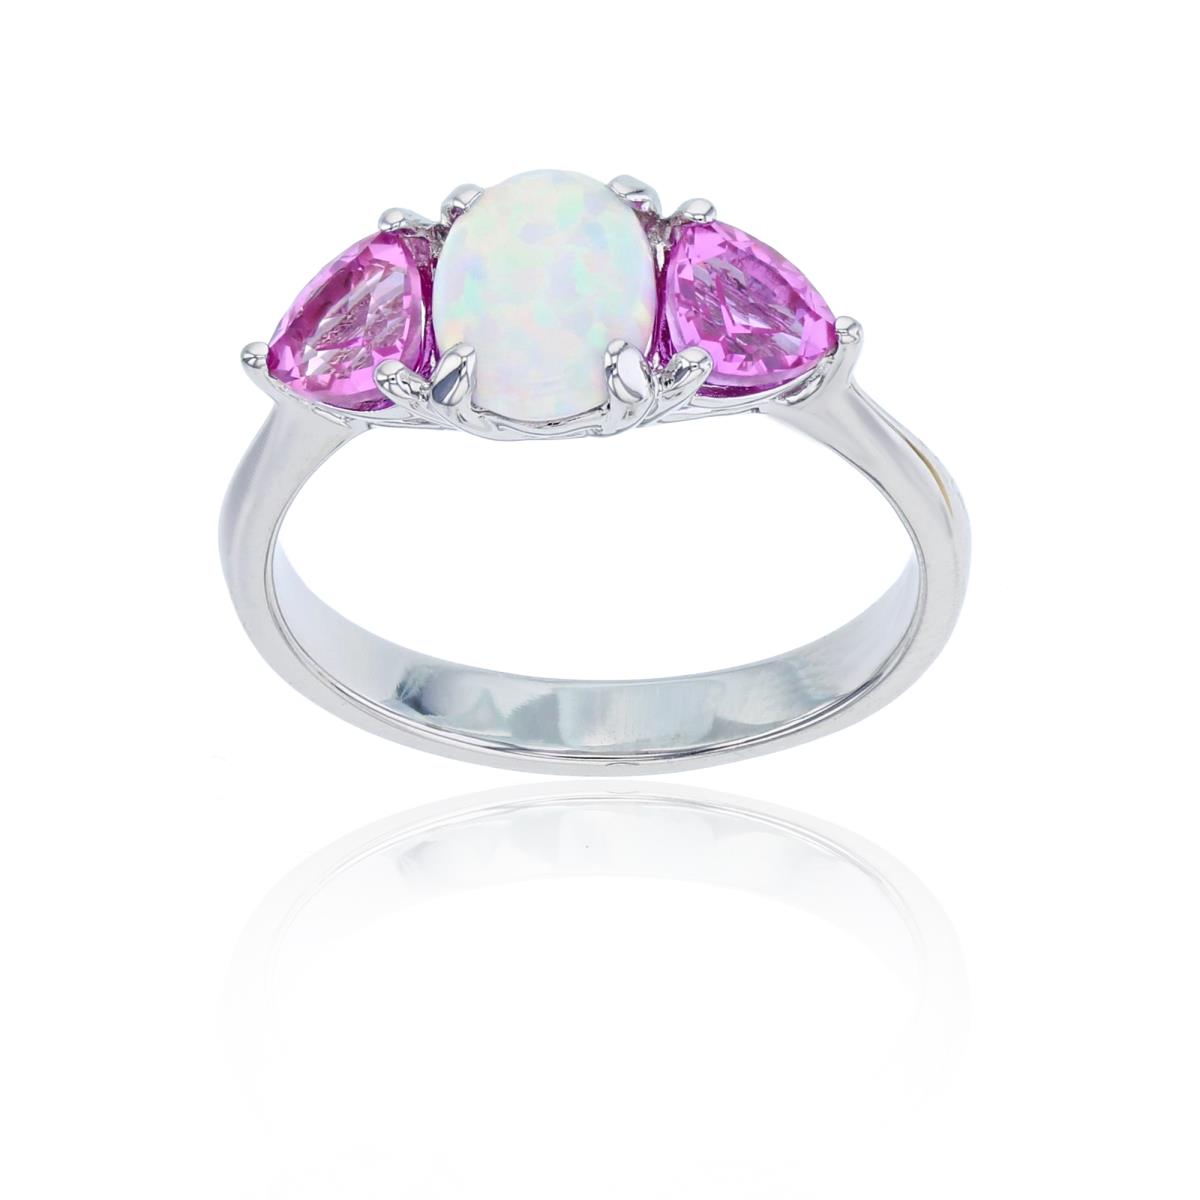  10K White Gold 8x6mm Ov Opal & 5mm Trill Pure Pink Ring